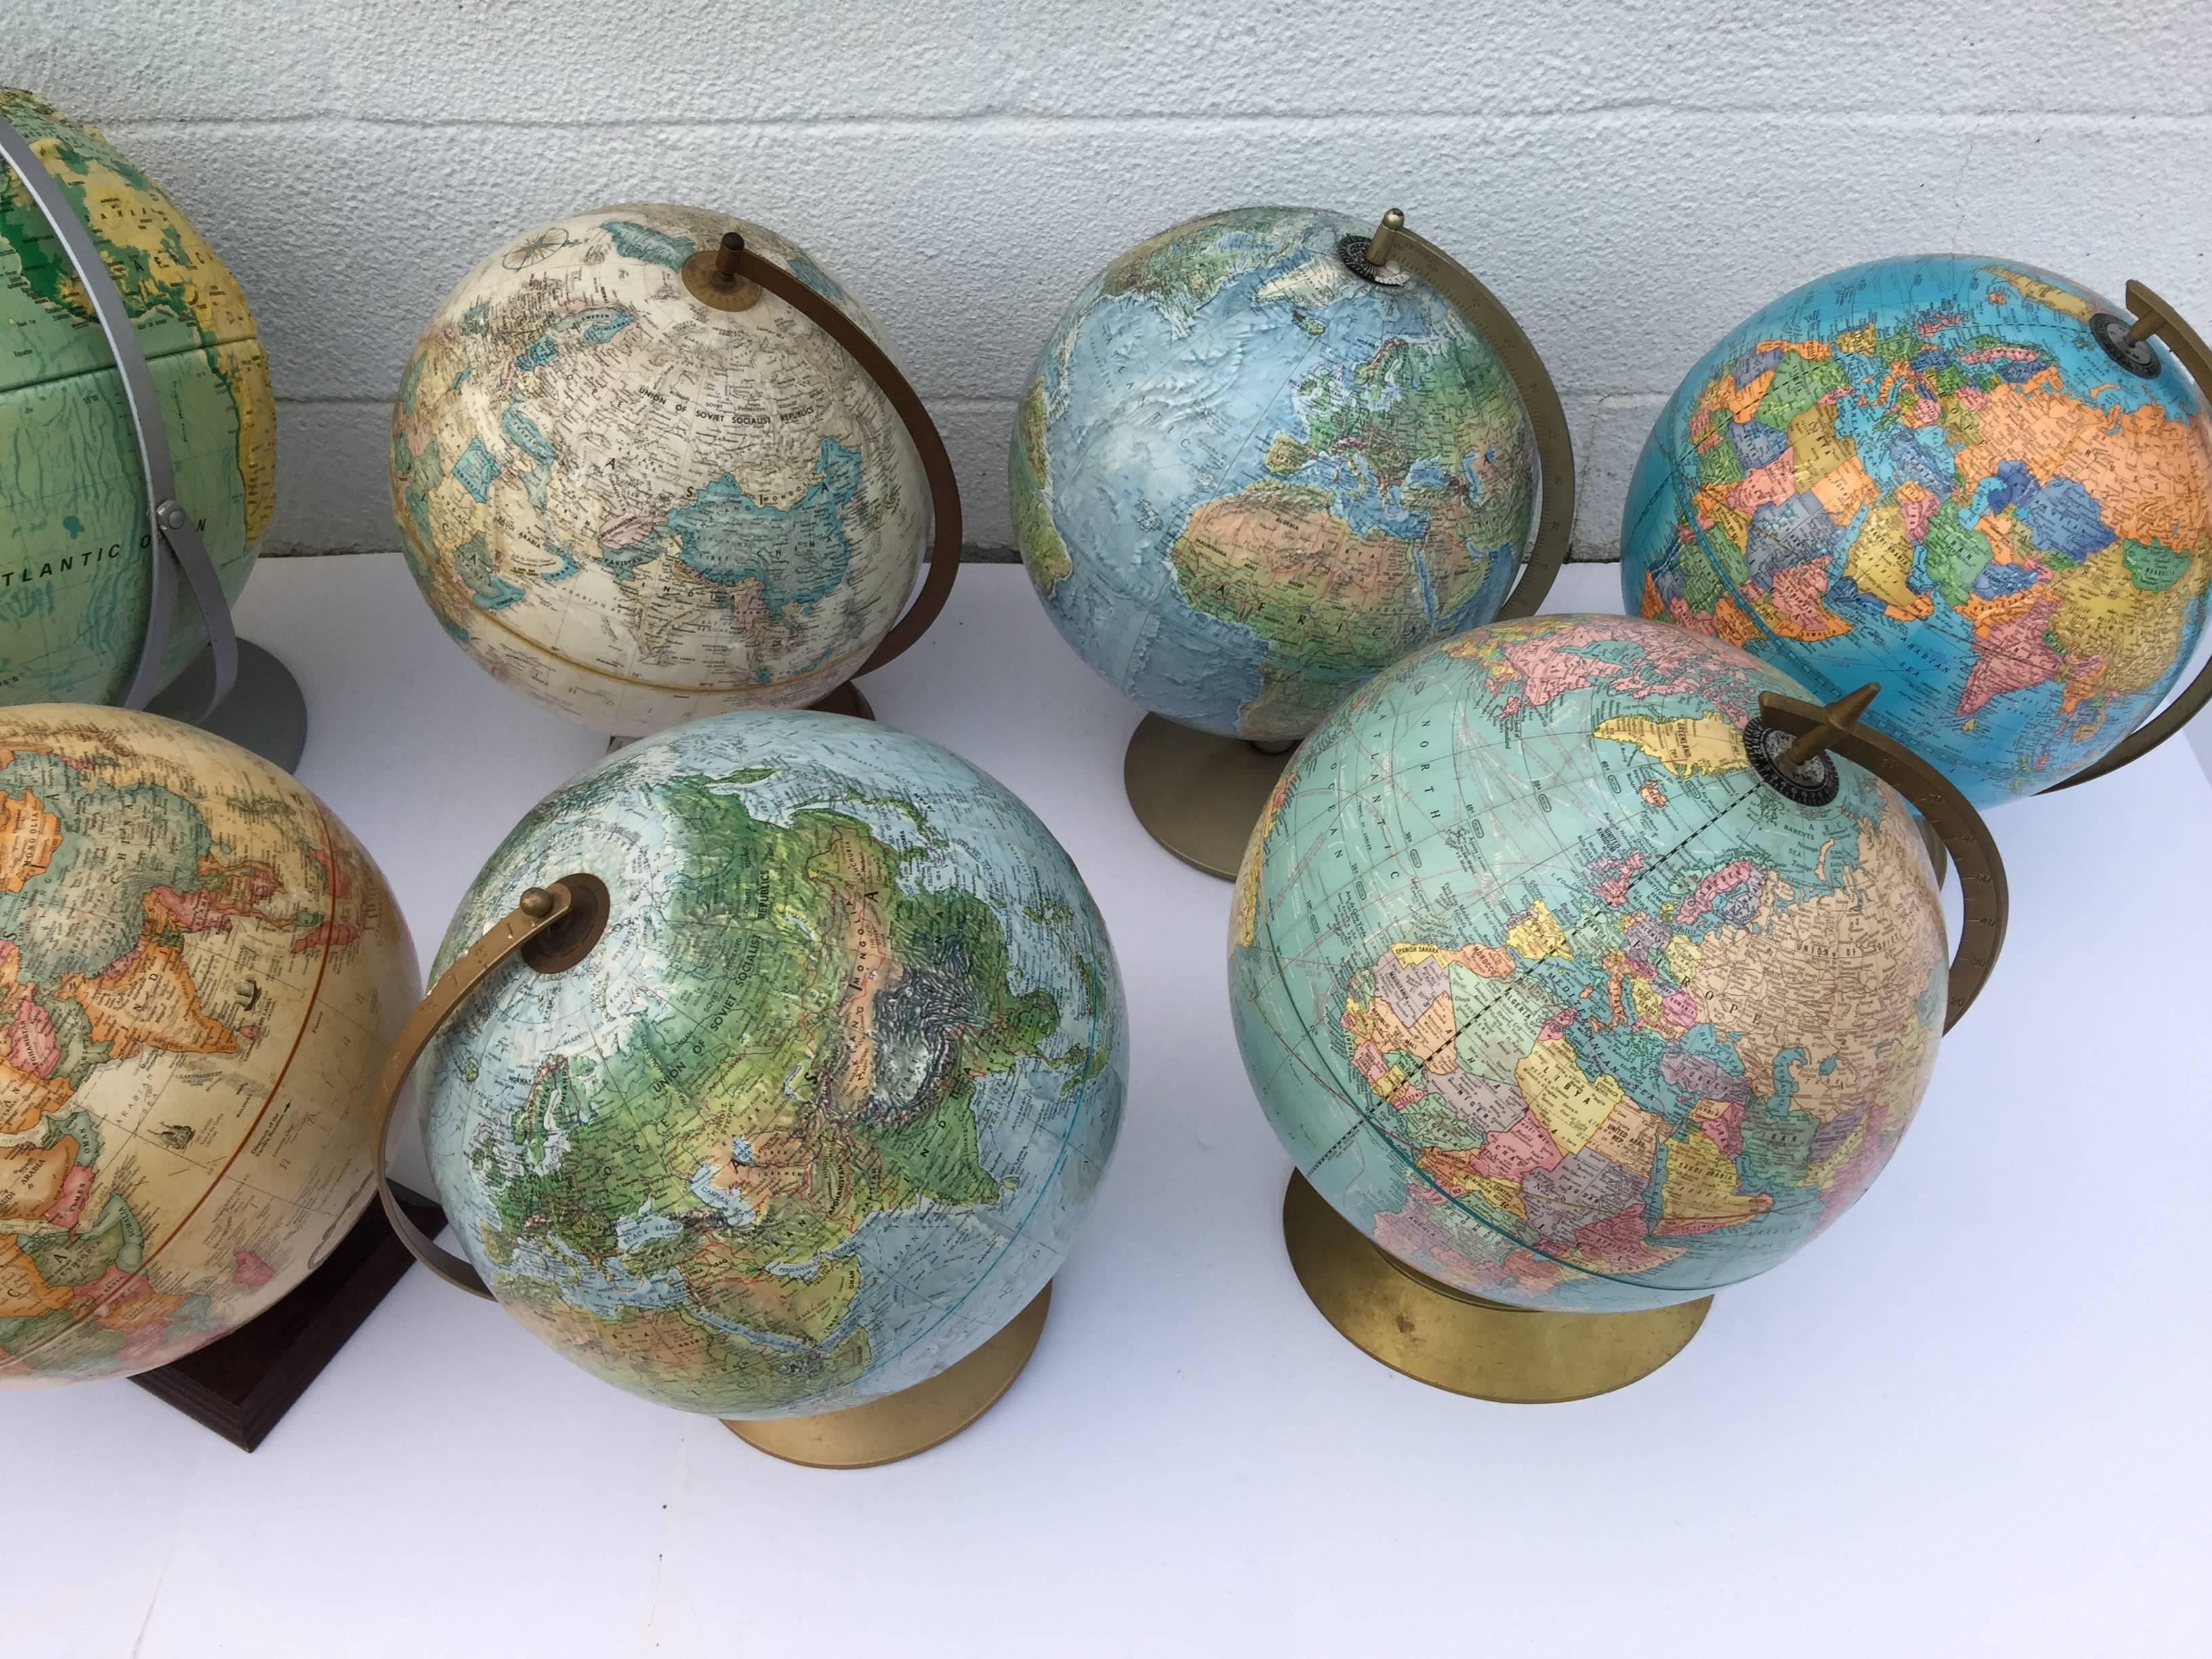 We have a collection of vintage globes in various sizes and colorways. Priced separately:
From left to right, back row $225, $750, $275, $225, $ 200.
Front row: $450, $325, $275, $300, $225.